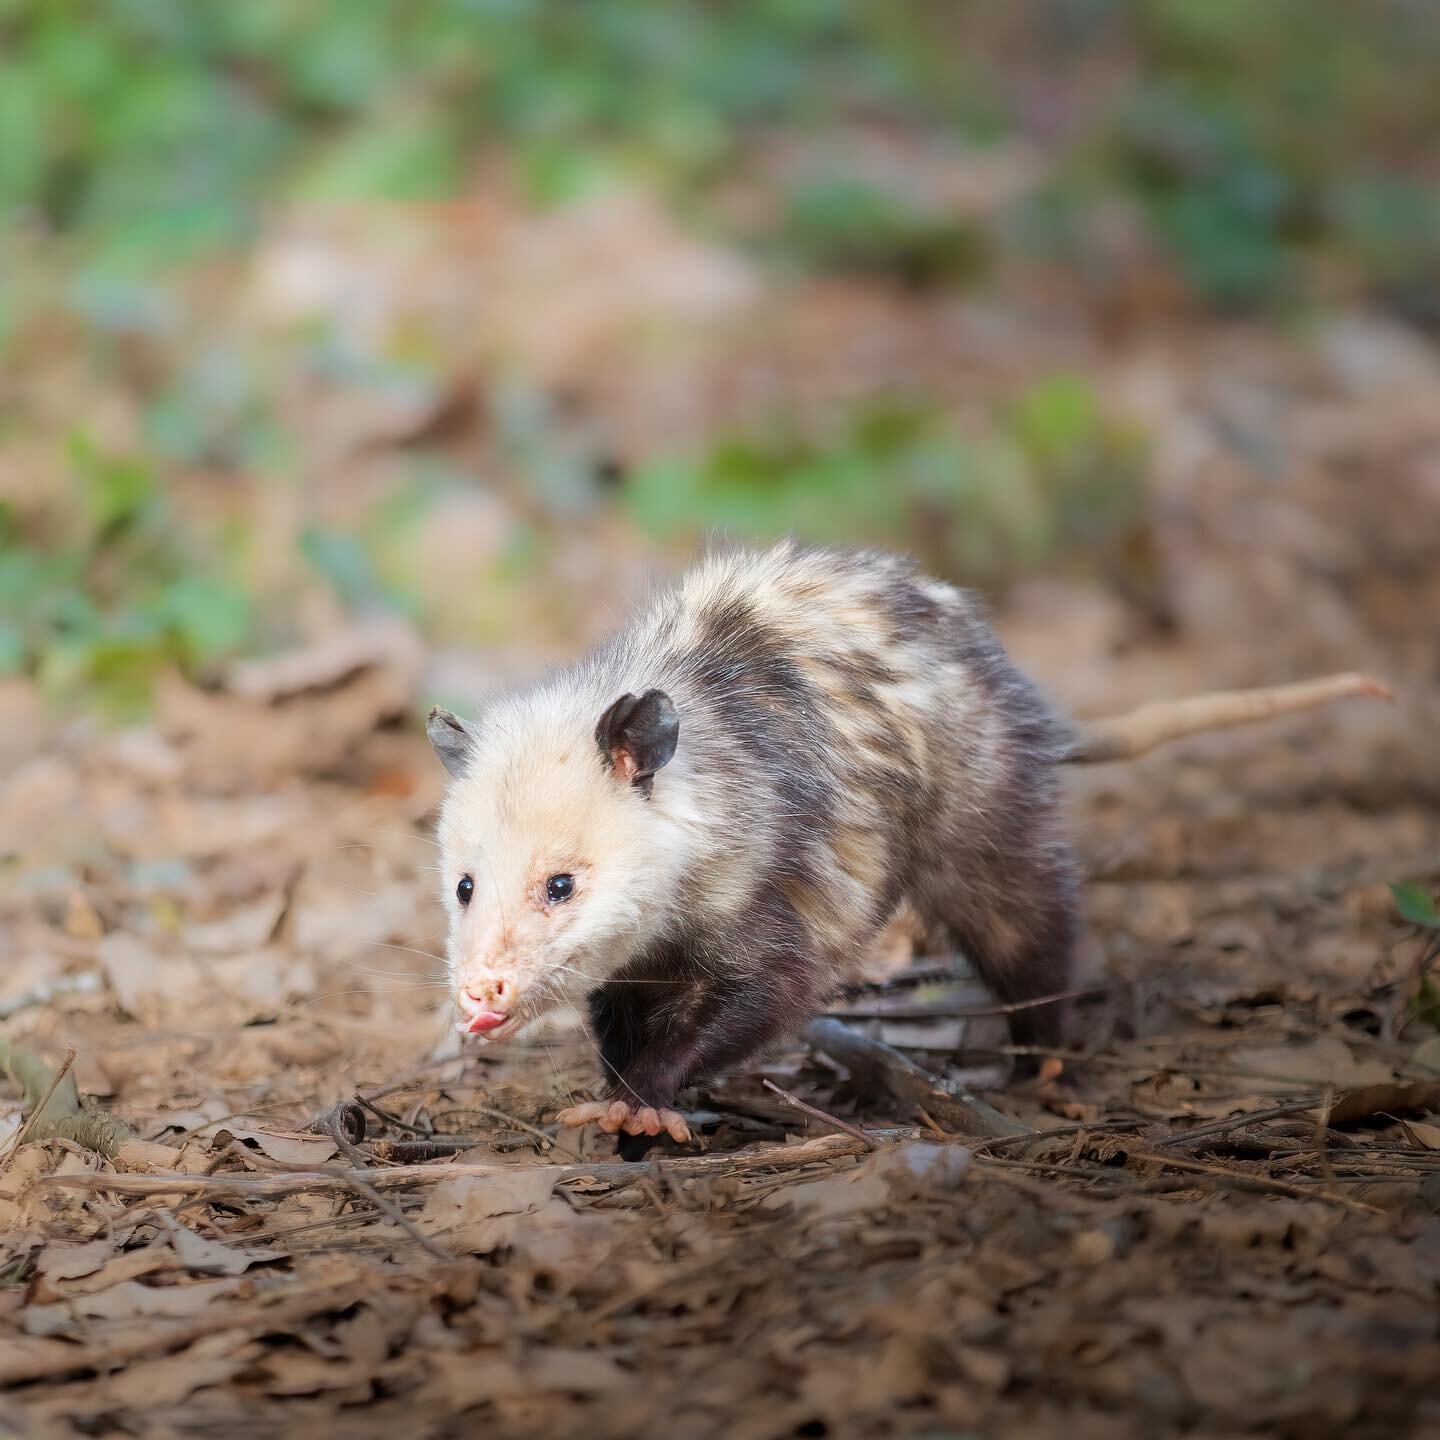 This opossum encounter was magic 
Out on a walk for my mental health I heard rustling in the brush and to my surprise this sweet boy came shuffling out. 
Opossums are incredible creatures and very misunderstood. 
Here are some fun facts about one of 